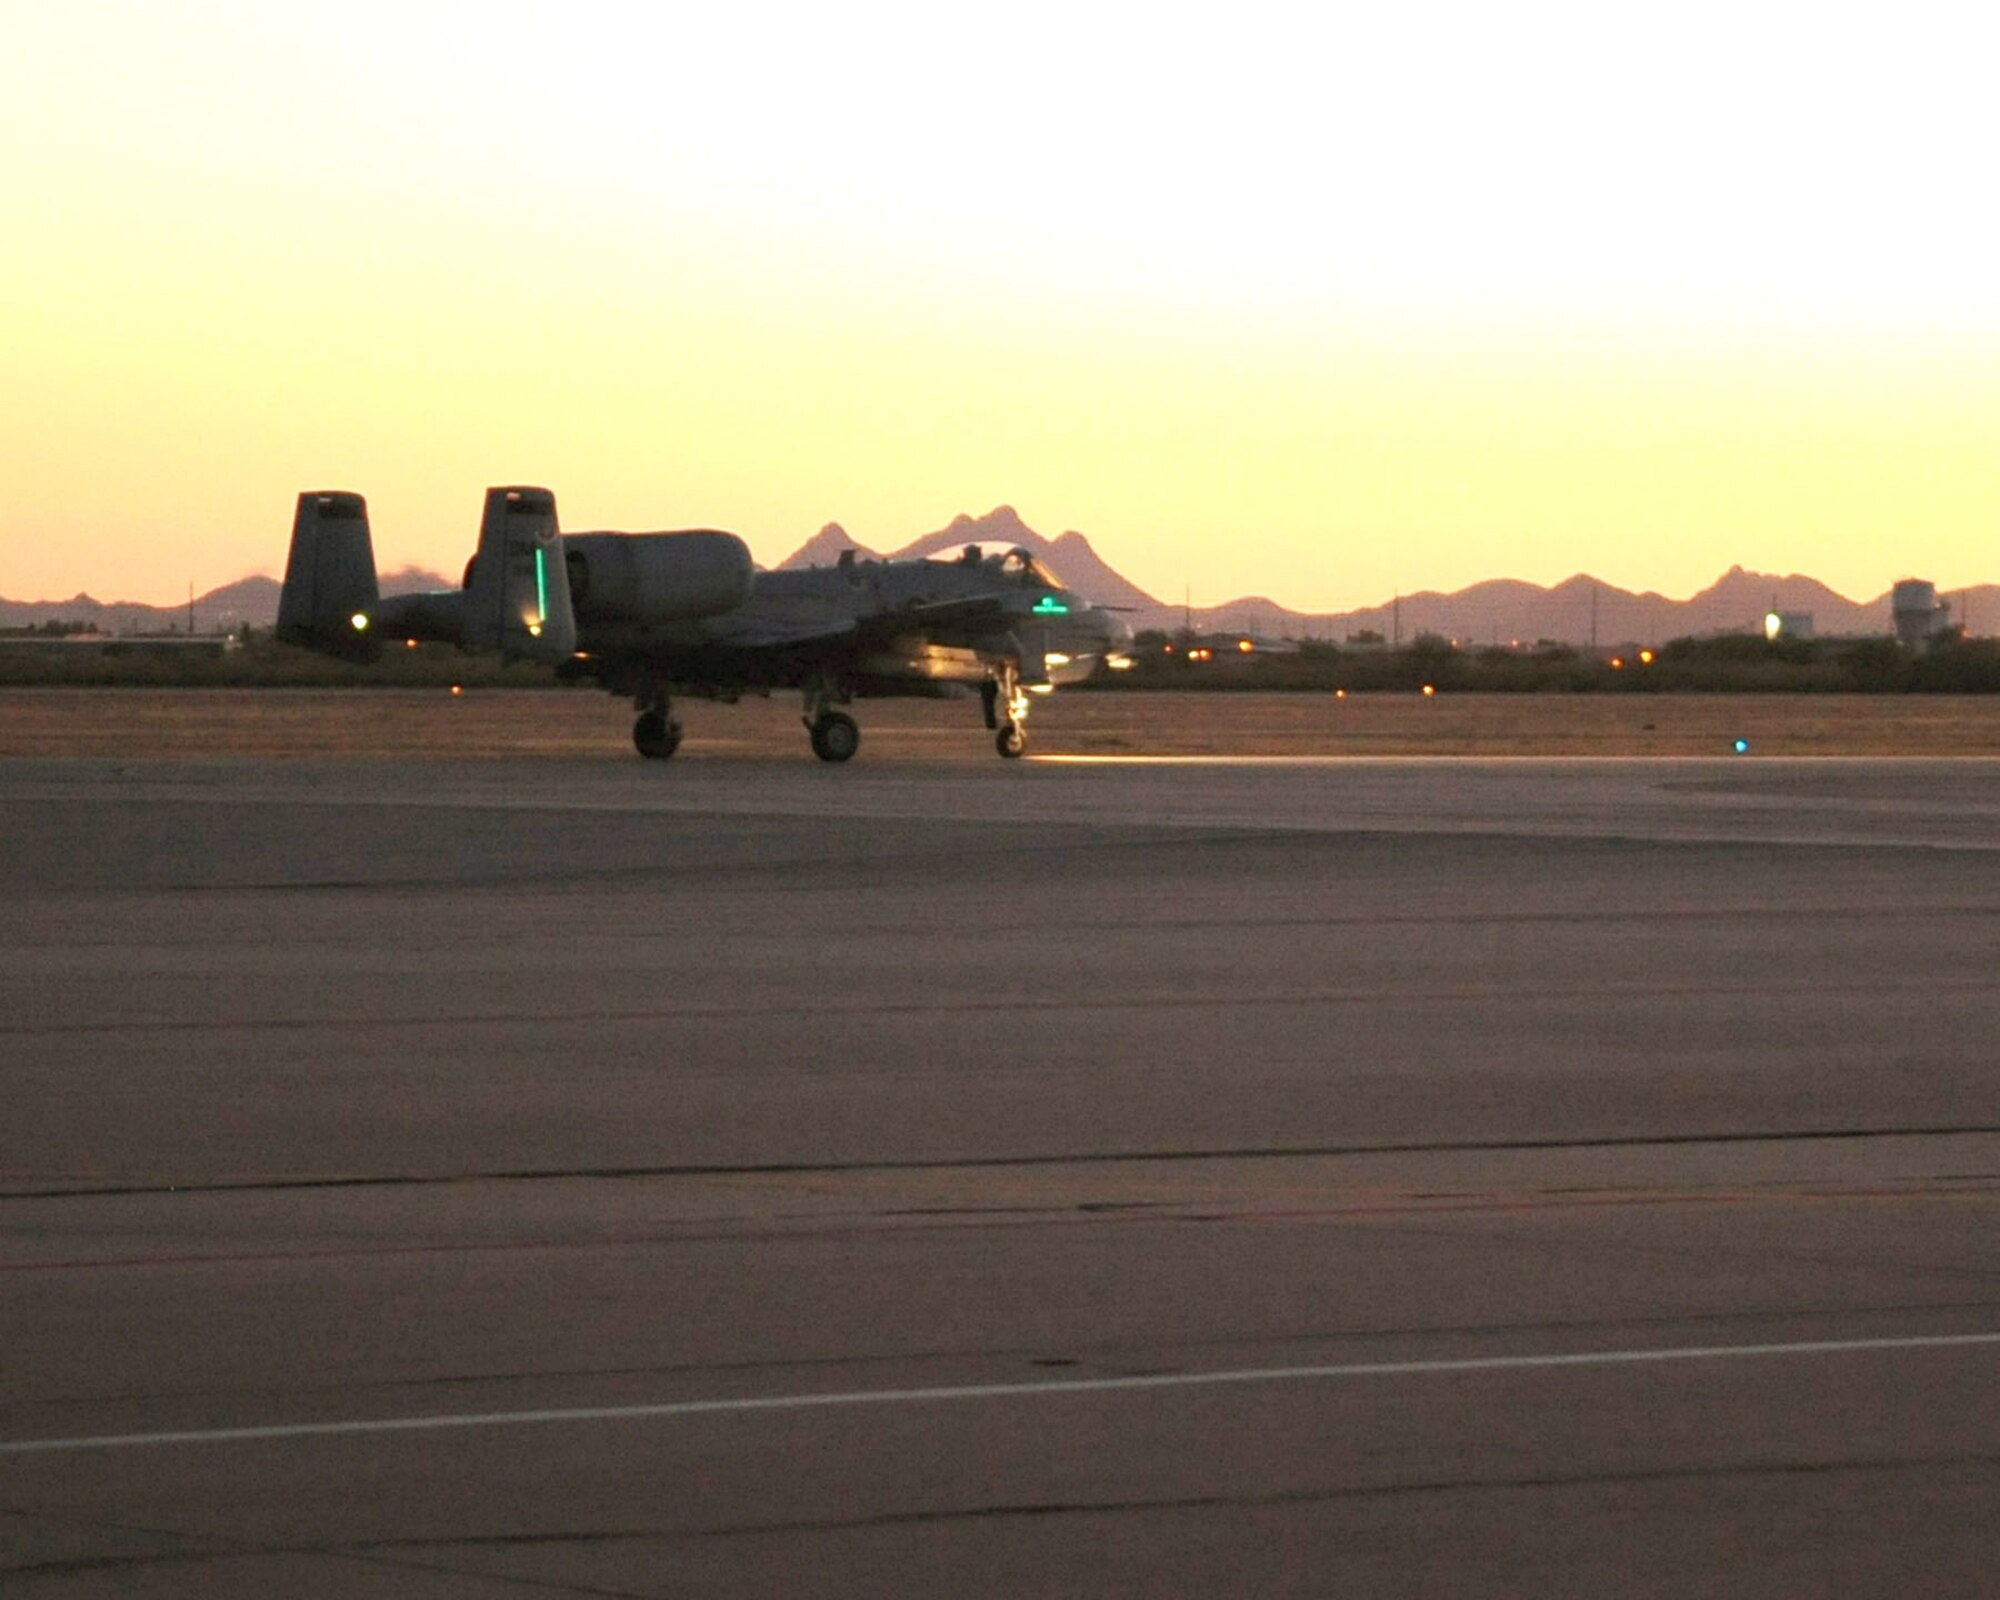 An A-10C Thunderbolt II moves down the taxiway at David-Monthan Air Force Base, Ariz., June 23, 2010, prior to taking off for a night flying mission.  As part of the A-10C Pilot Initial Qualification course curriculum all pilots must learn to execute night flying missions through six hours of academic classes, five hours in the A-10 flight simulator and eight training flights. (U.S. Air Force photo/Airman 1st Class Jerilyn Quintanilla)